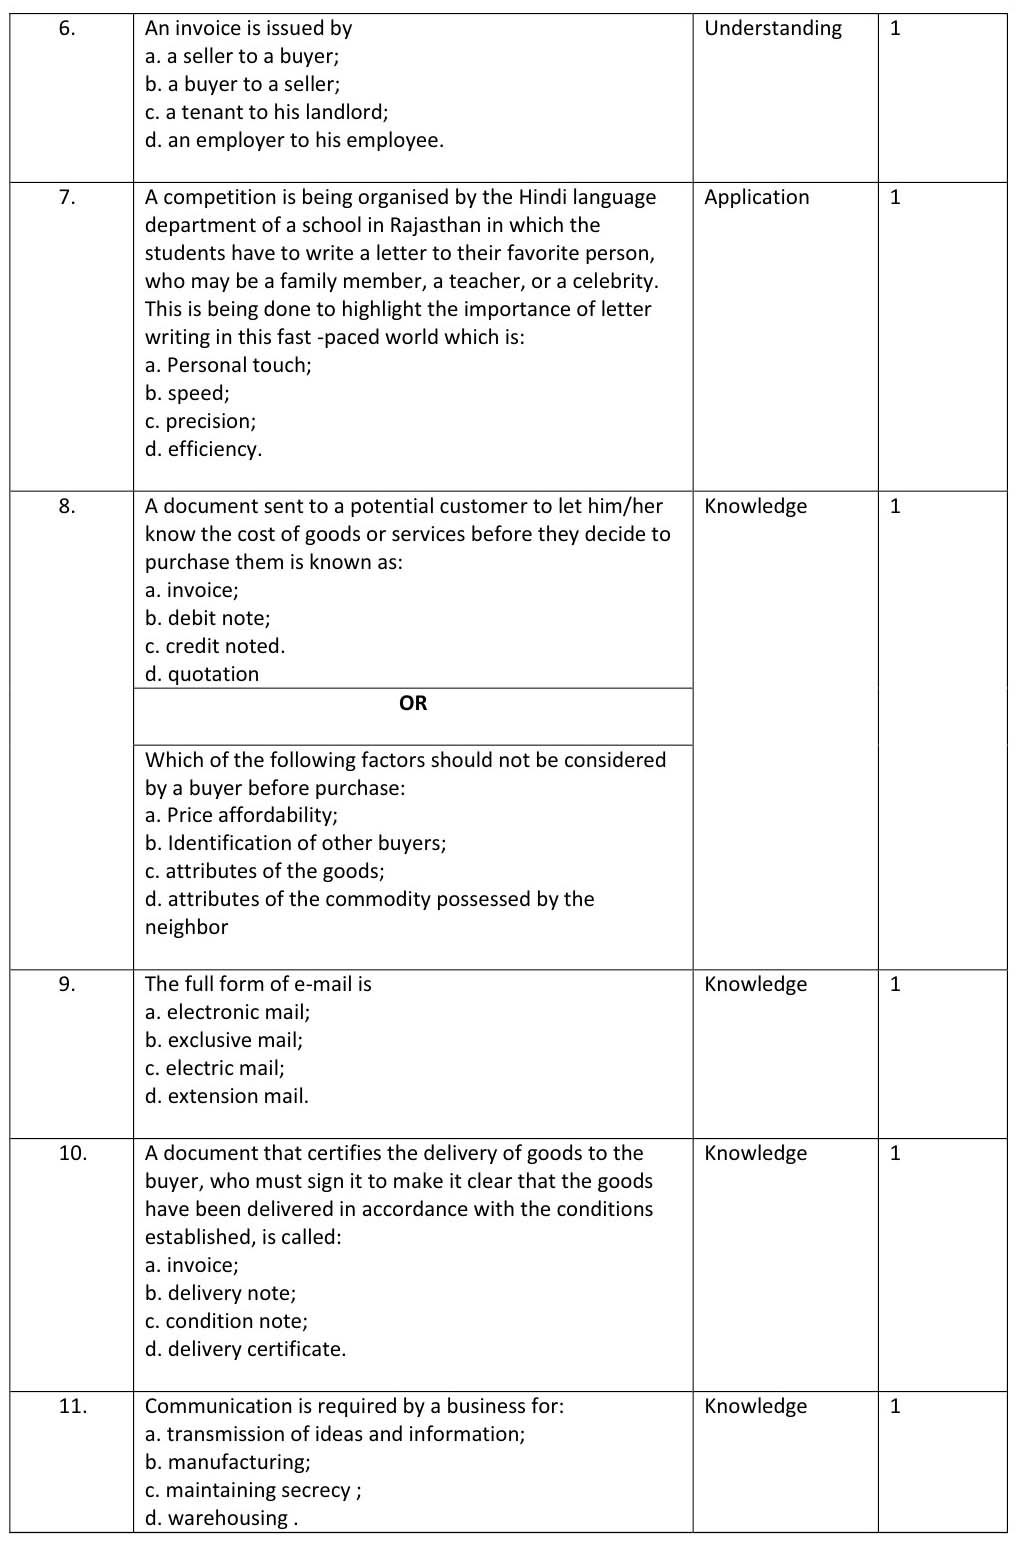 Element of Business CBSE Class X Sample Question Paper 2018-19 - Image 2